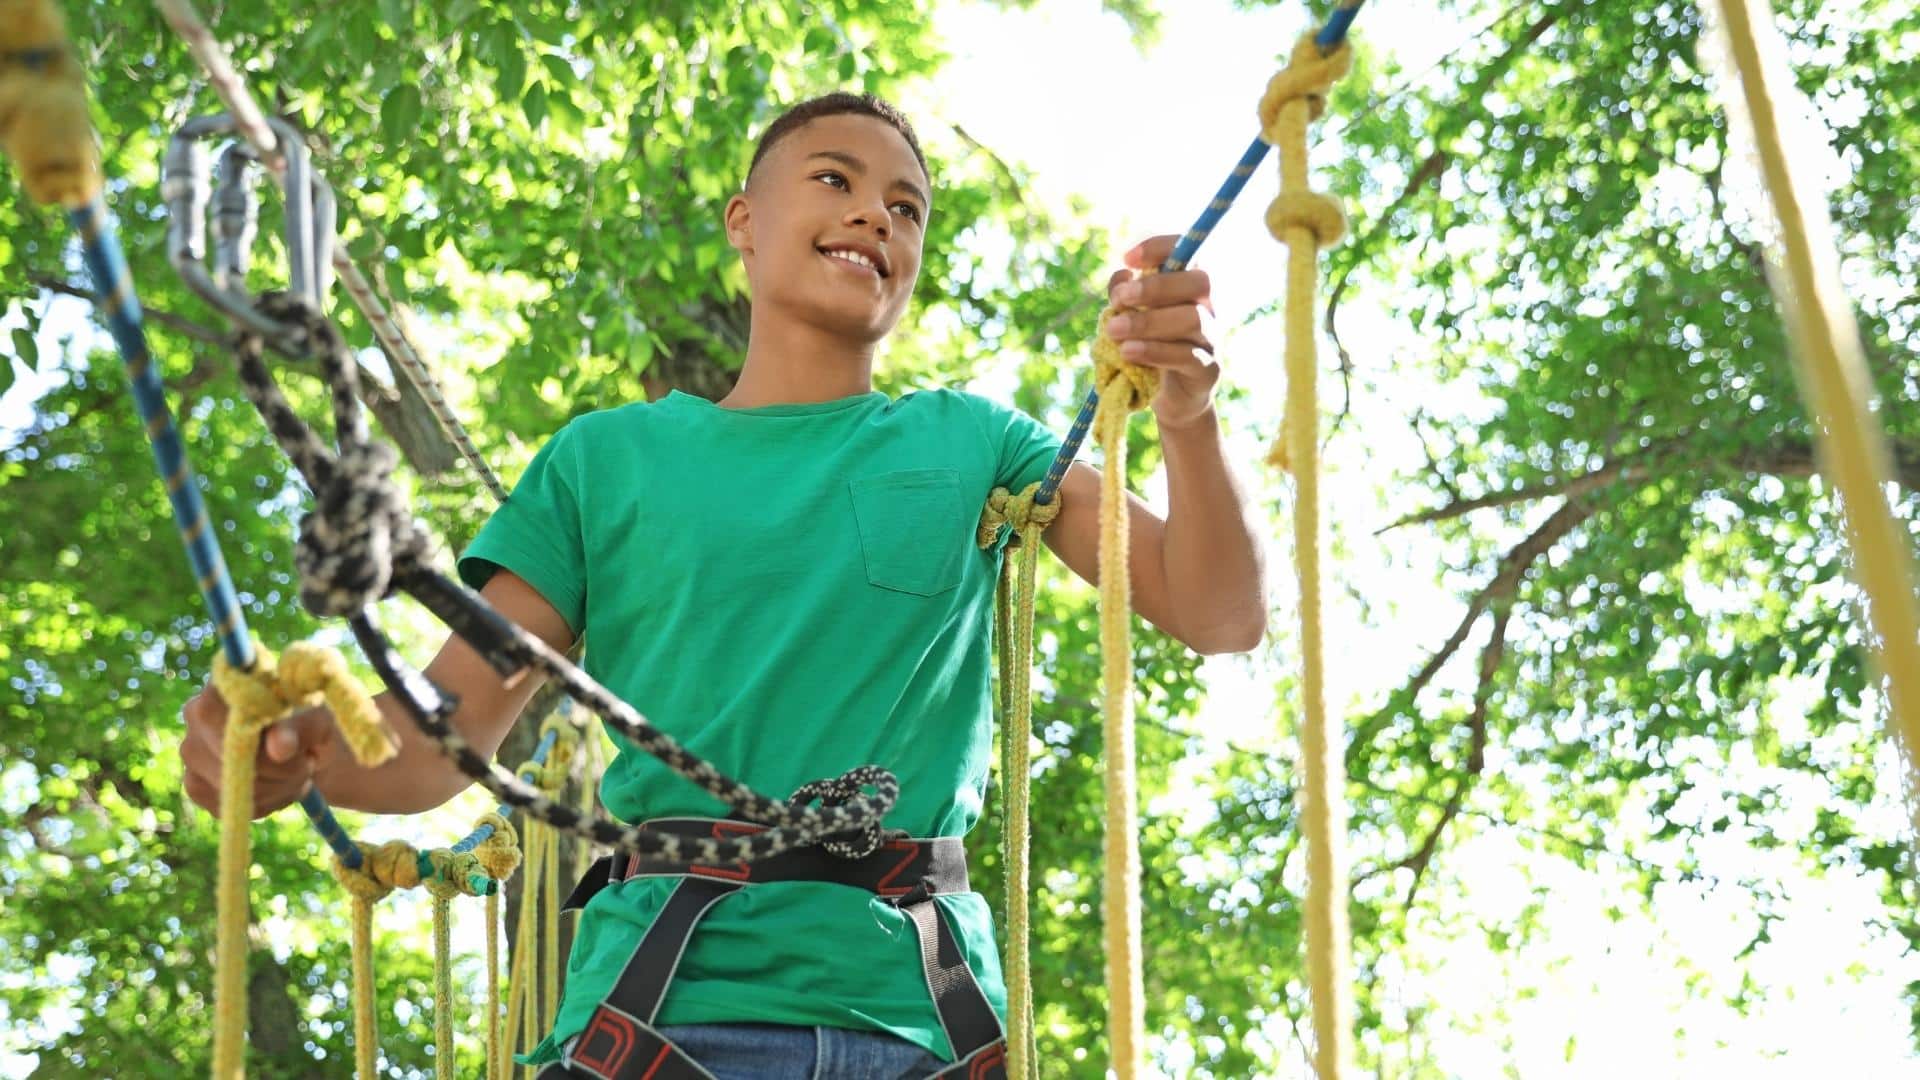 Outdoor Activities for Family - Ropes Course